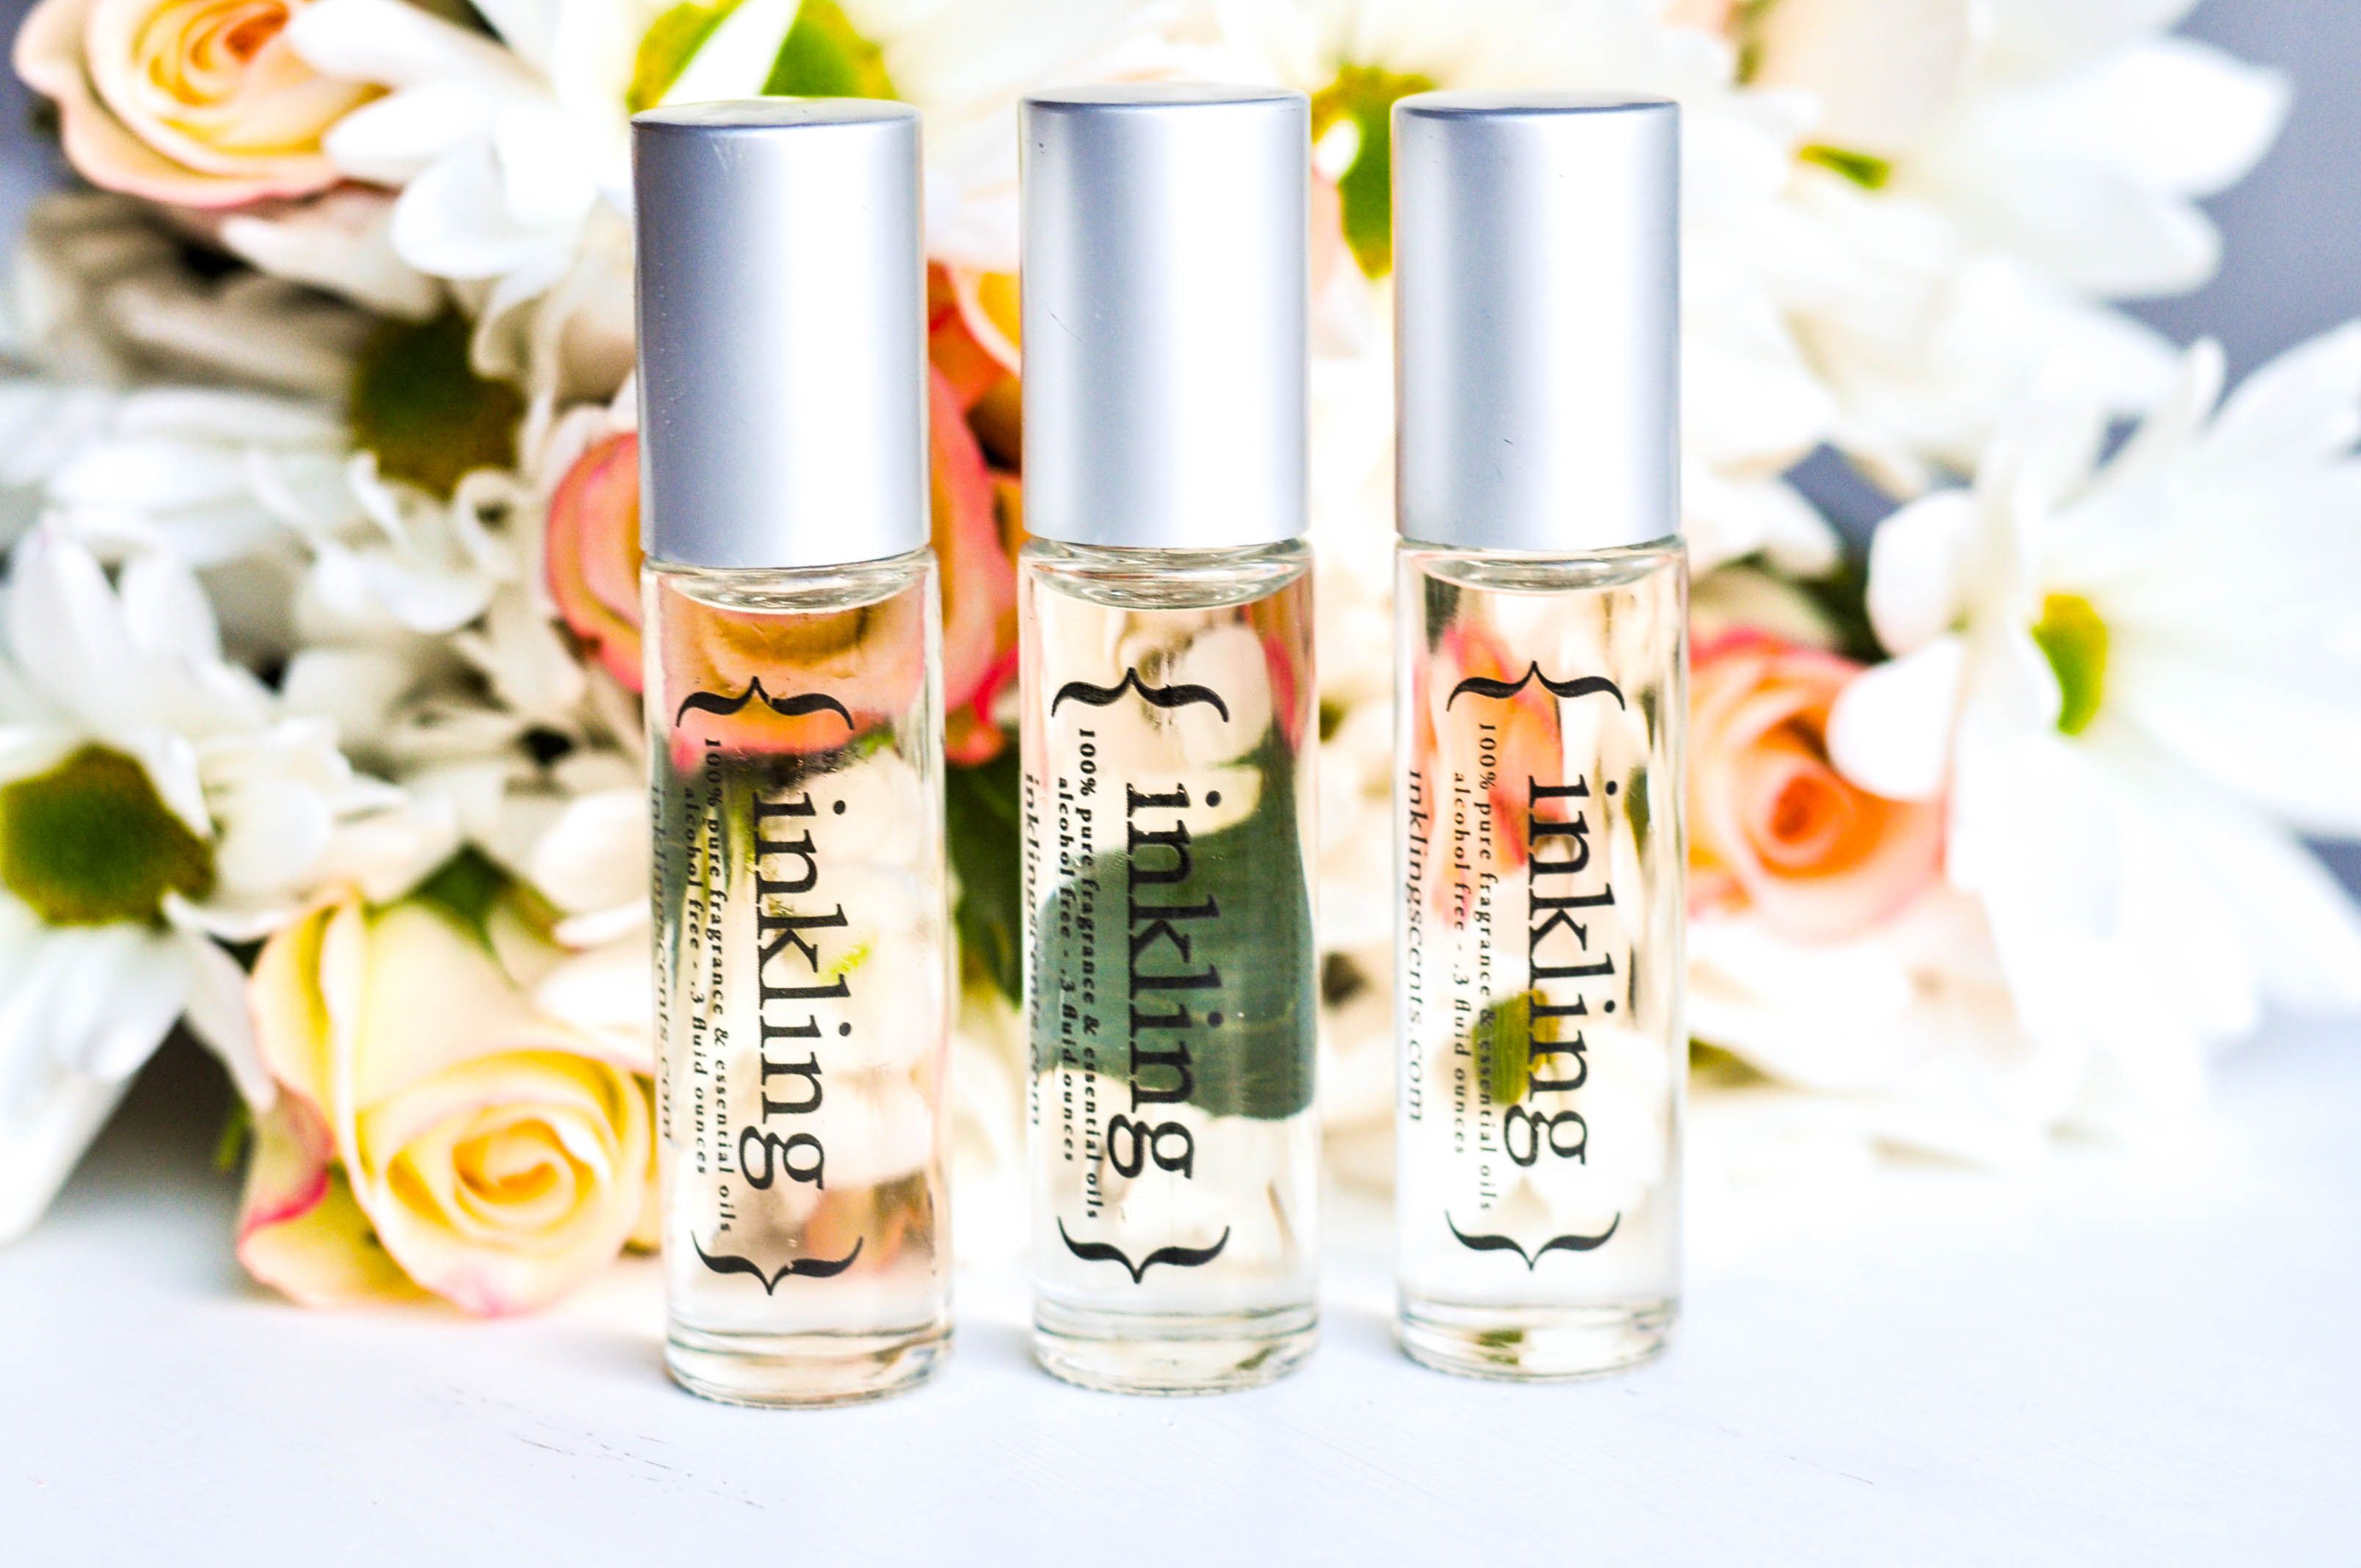 Is Inkling Scents cruelty free?